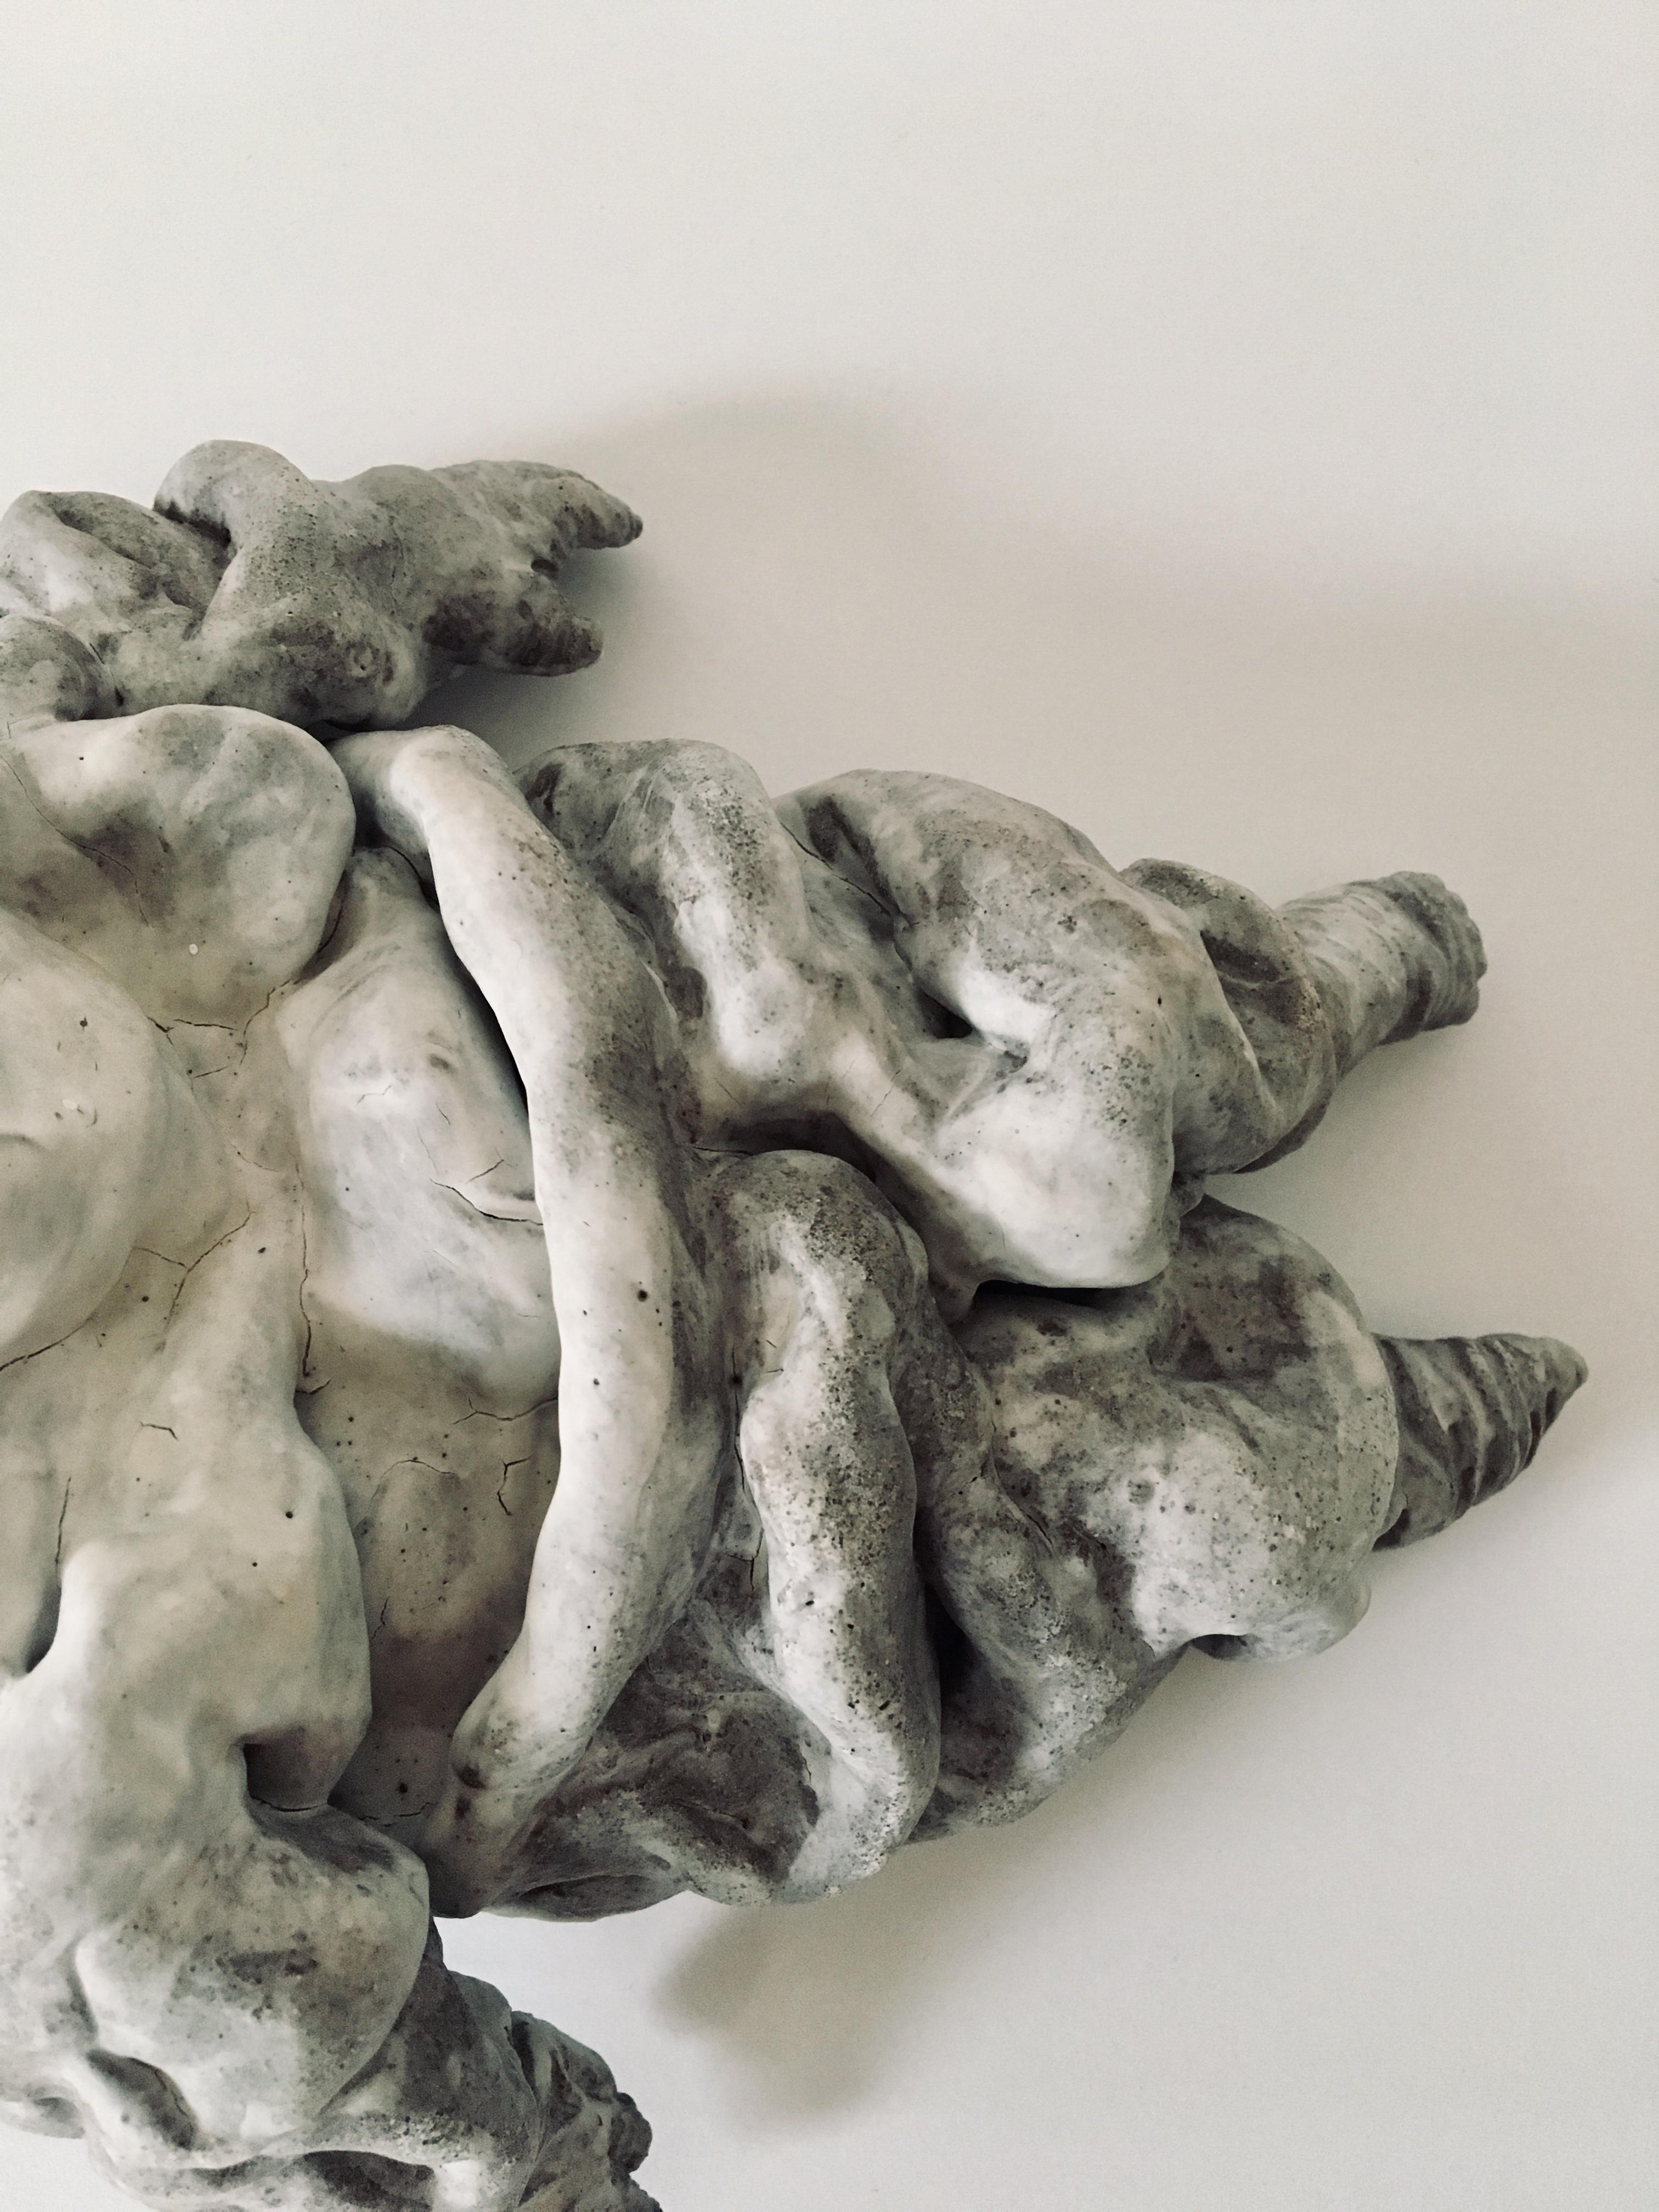 Ceramic figure lying down, sculpture: Figurative 'Wasted' 9